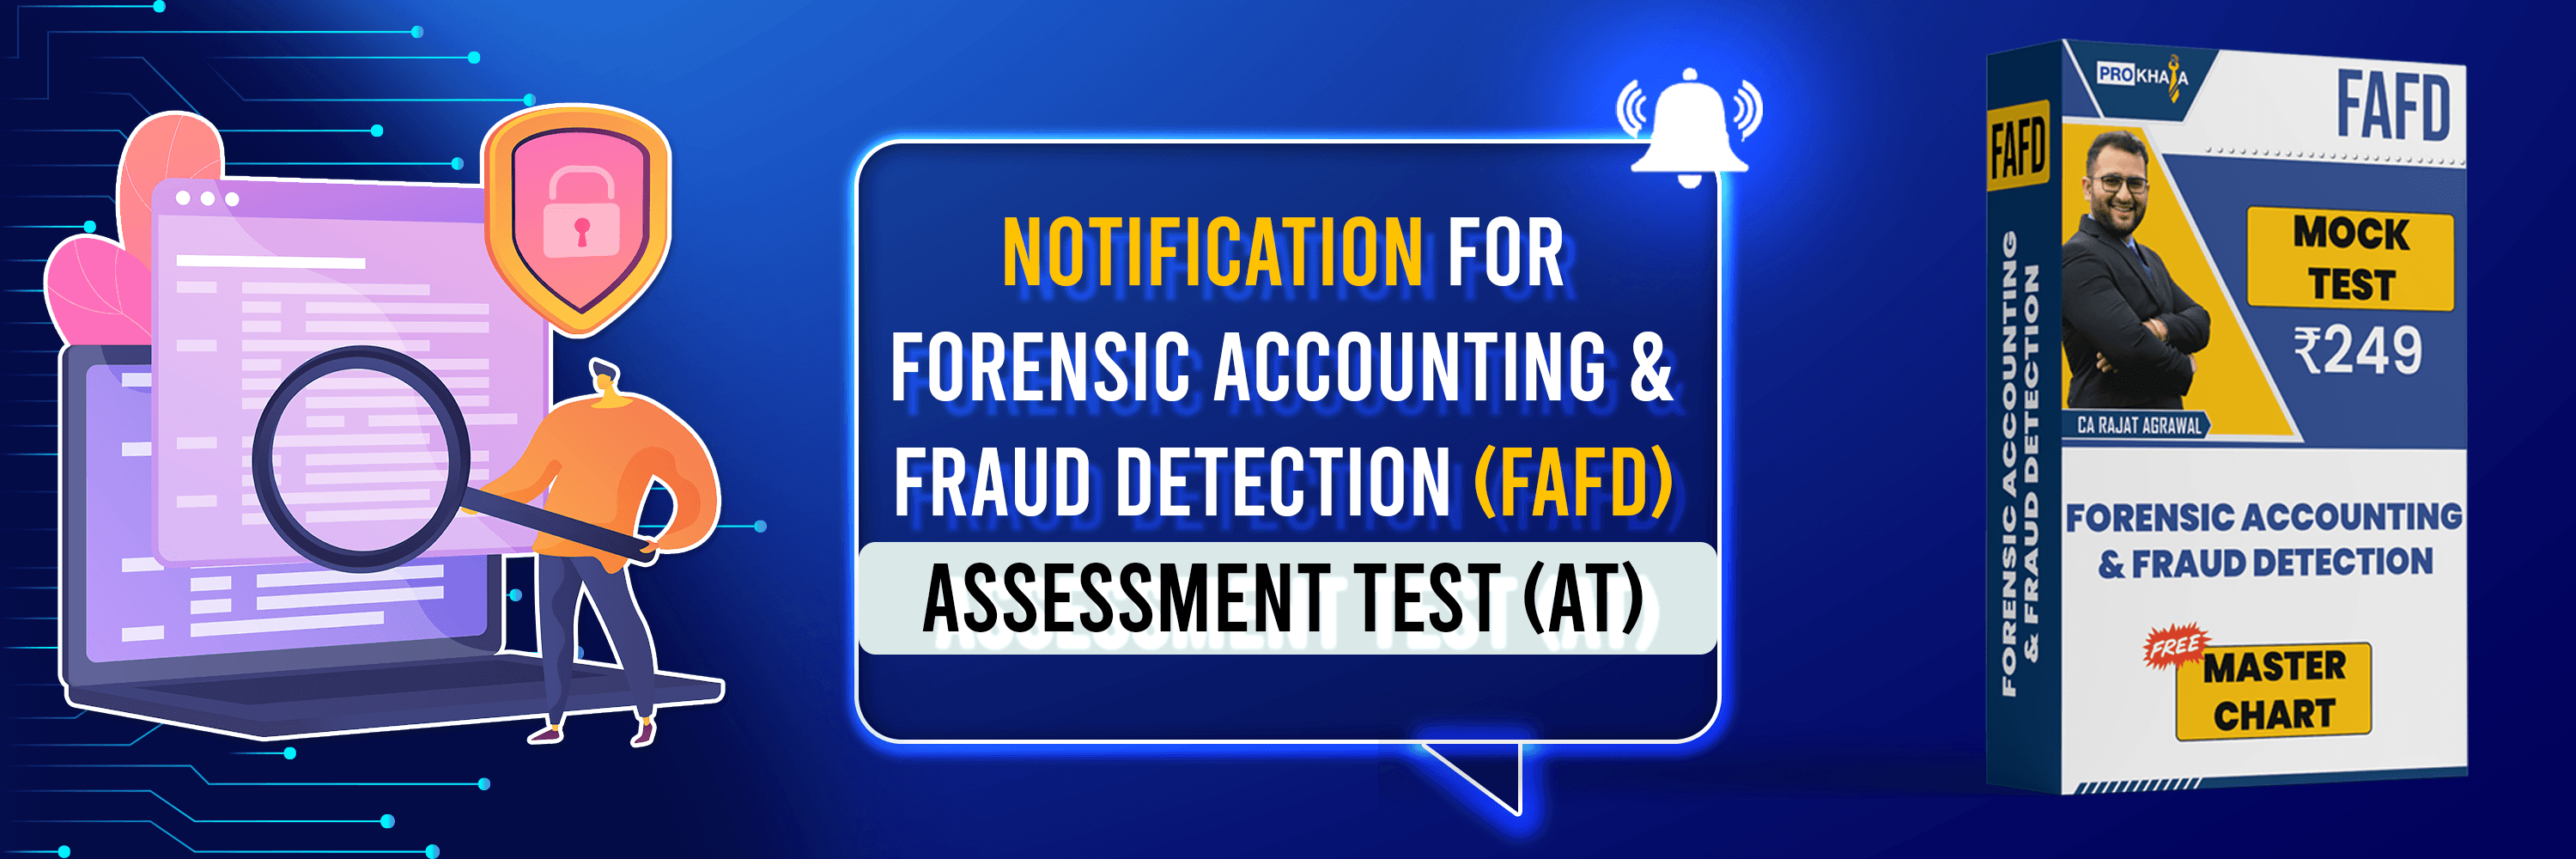 Notification for Forensic Accounting and Fraud Detection (FAFD) Assessment Test (AT)1